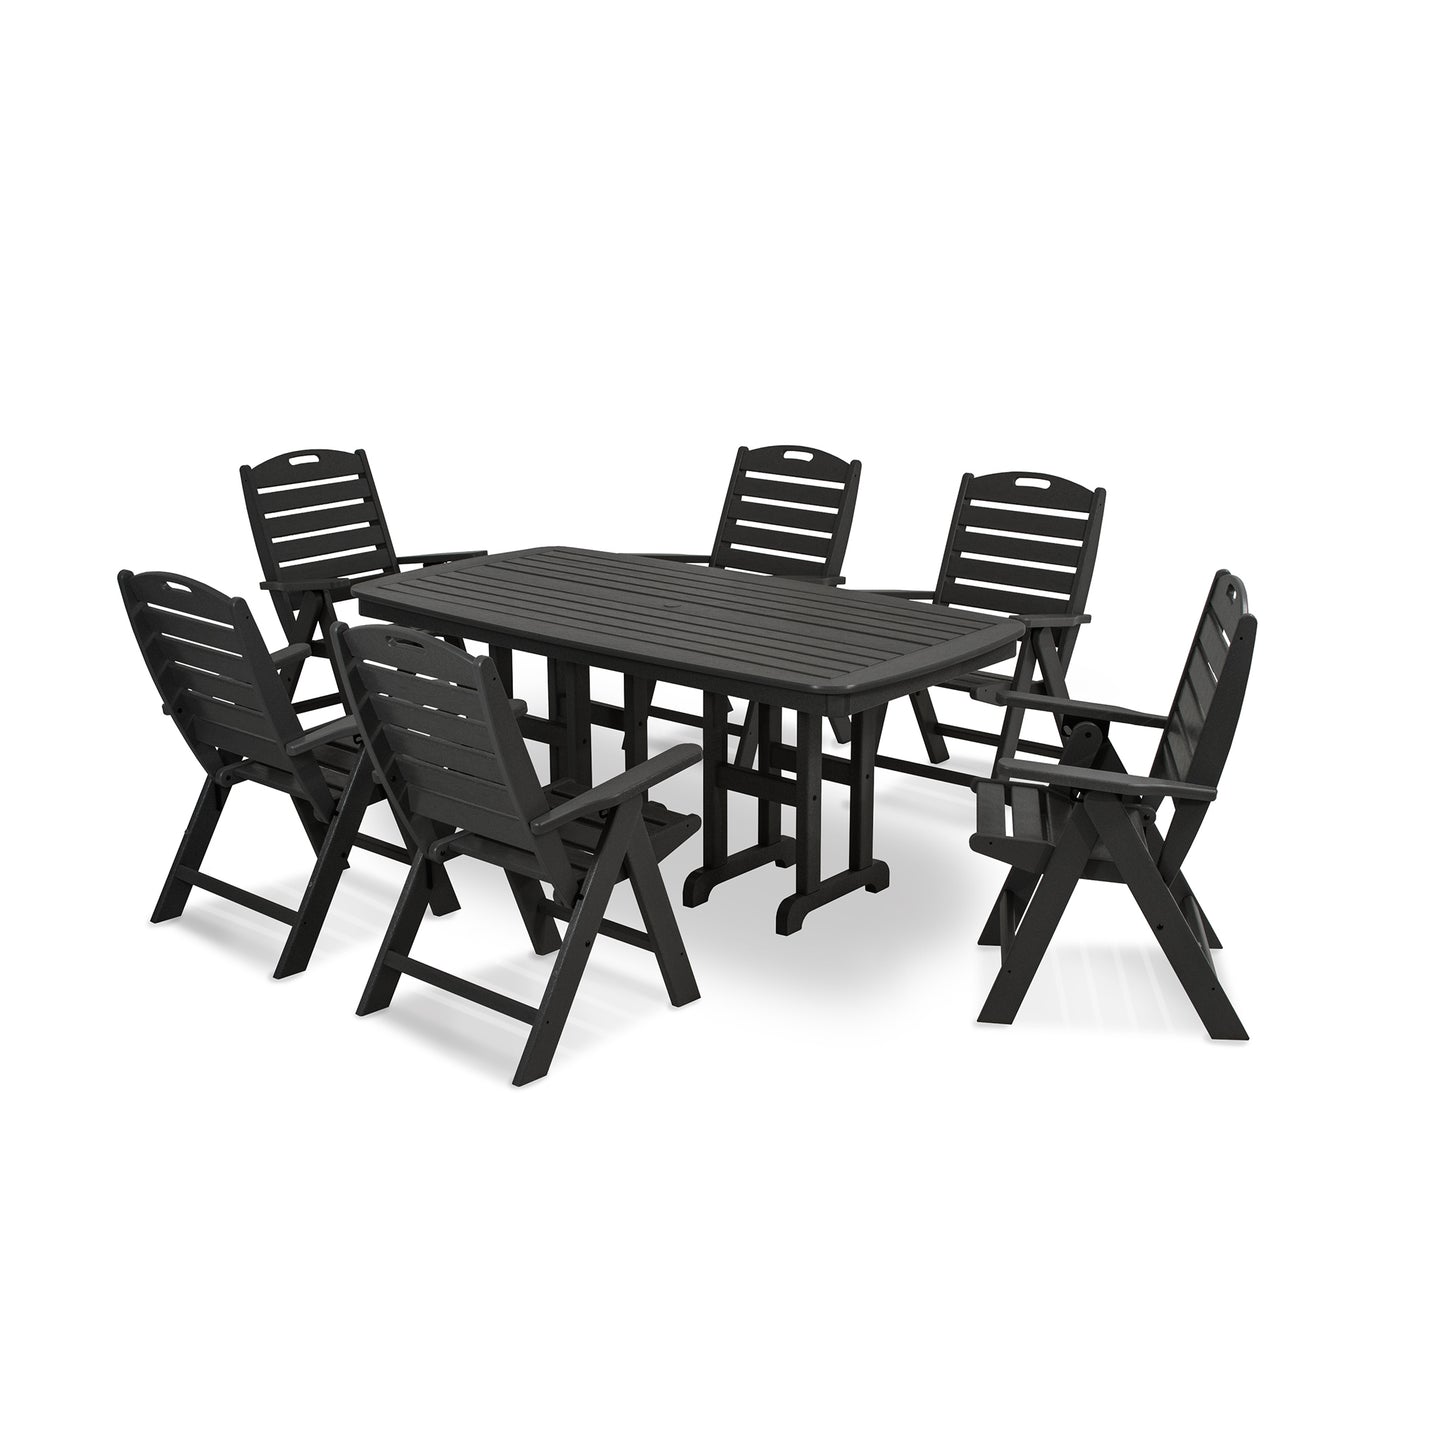 A modern outdoor dining set including a rectangular black table and six matching chairs, all made of durable POLYWOOD® Nautical 7-Piece Dining Set, arranged on a white background.